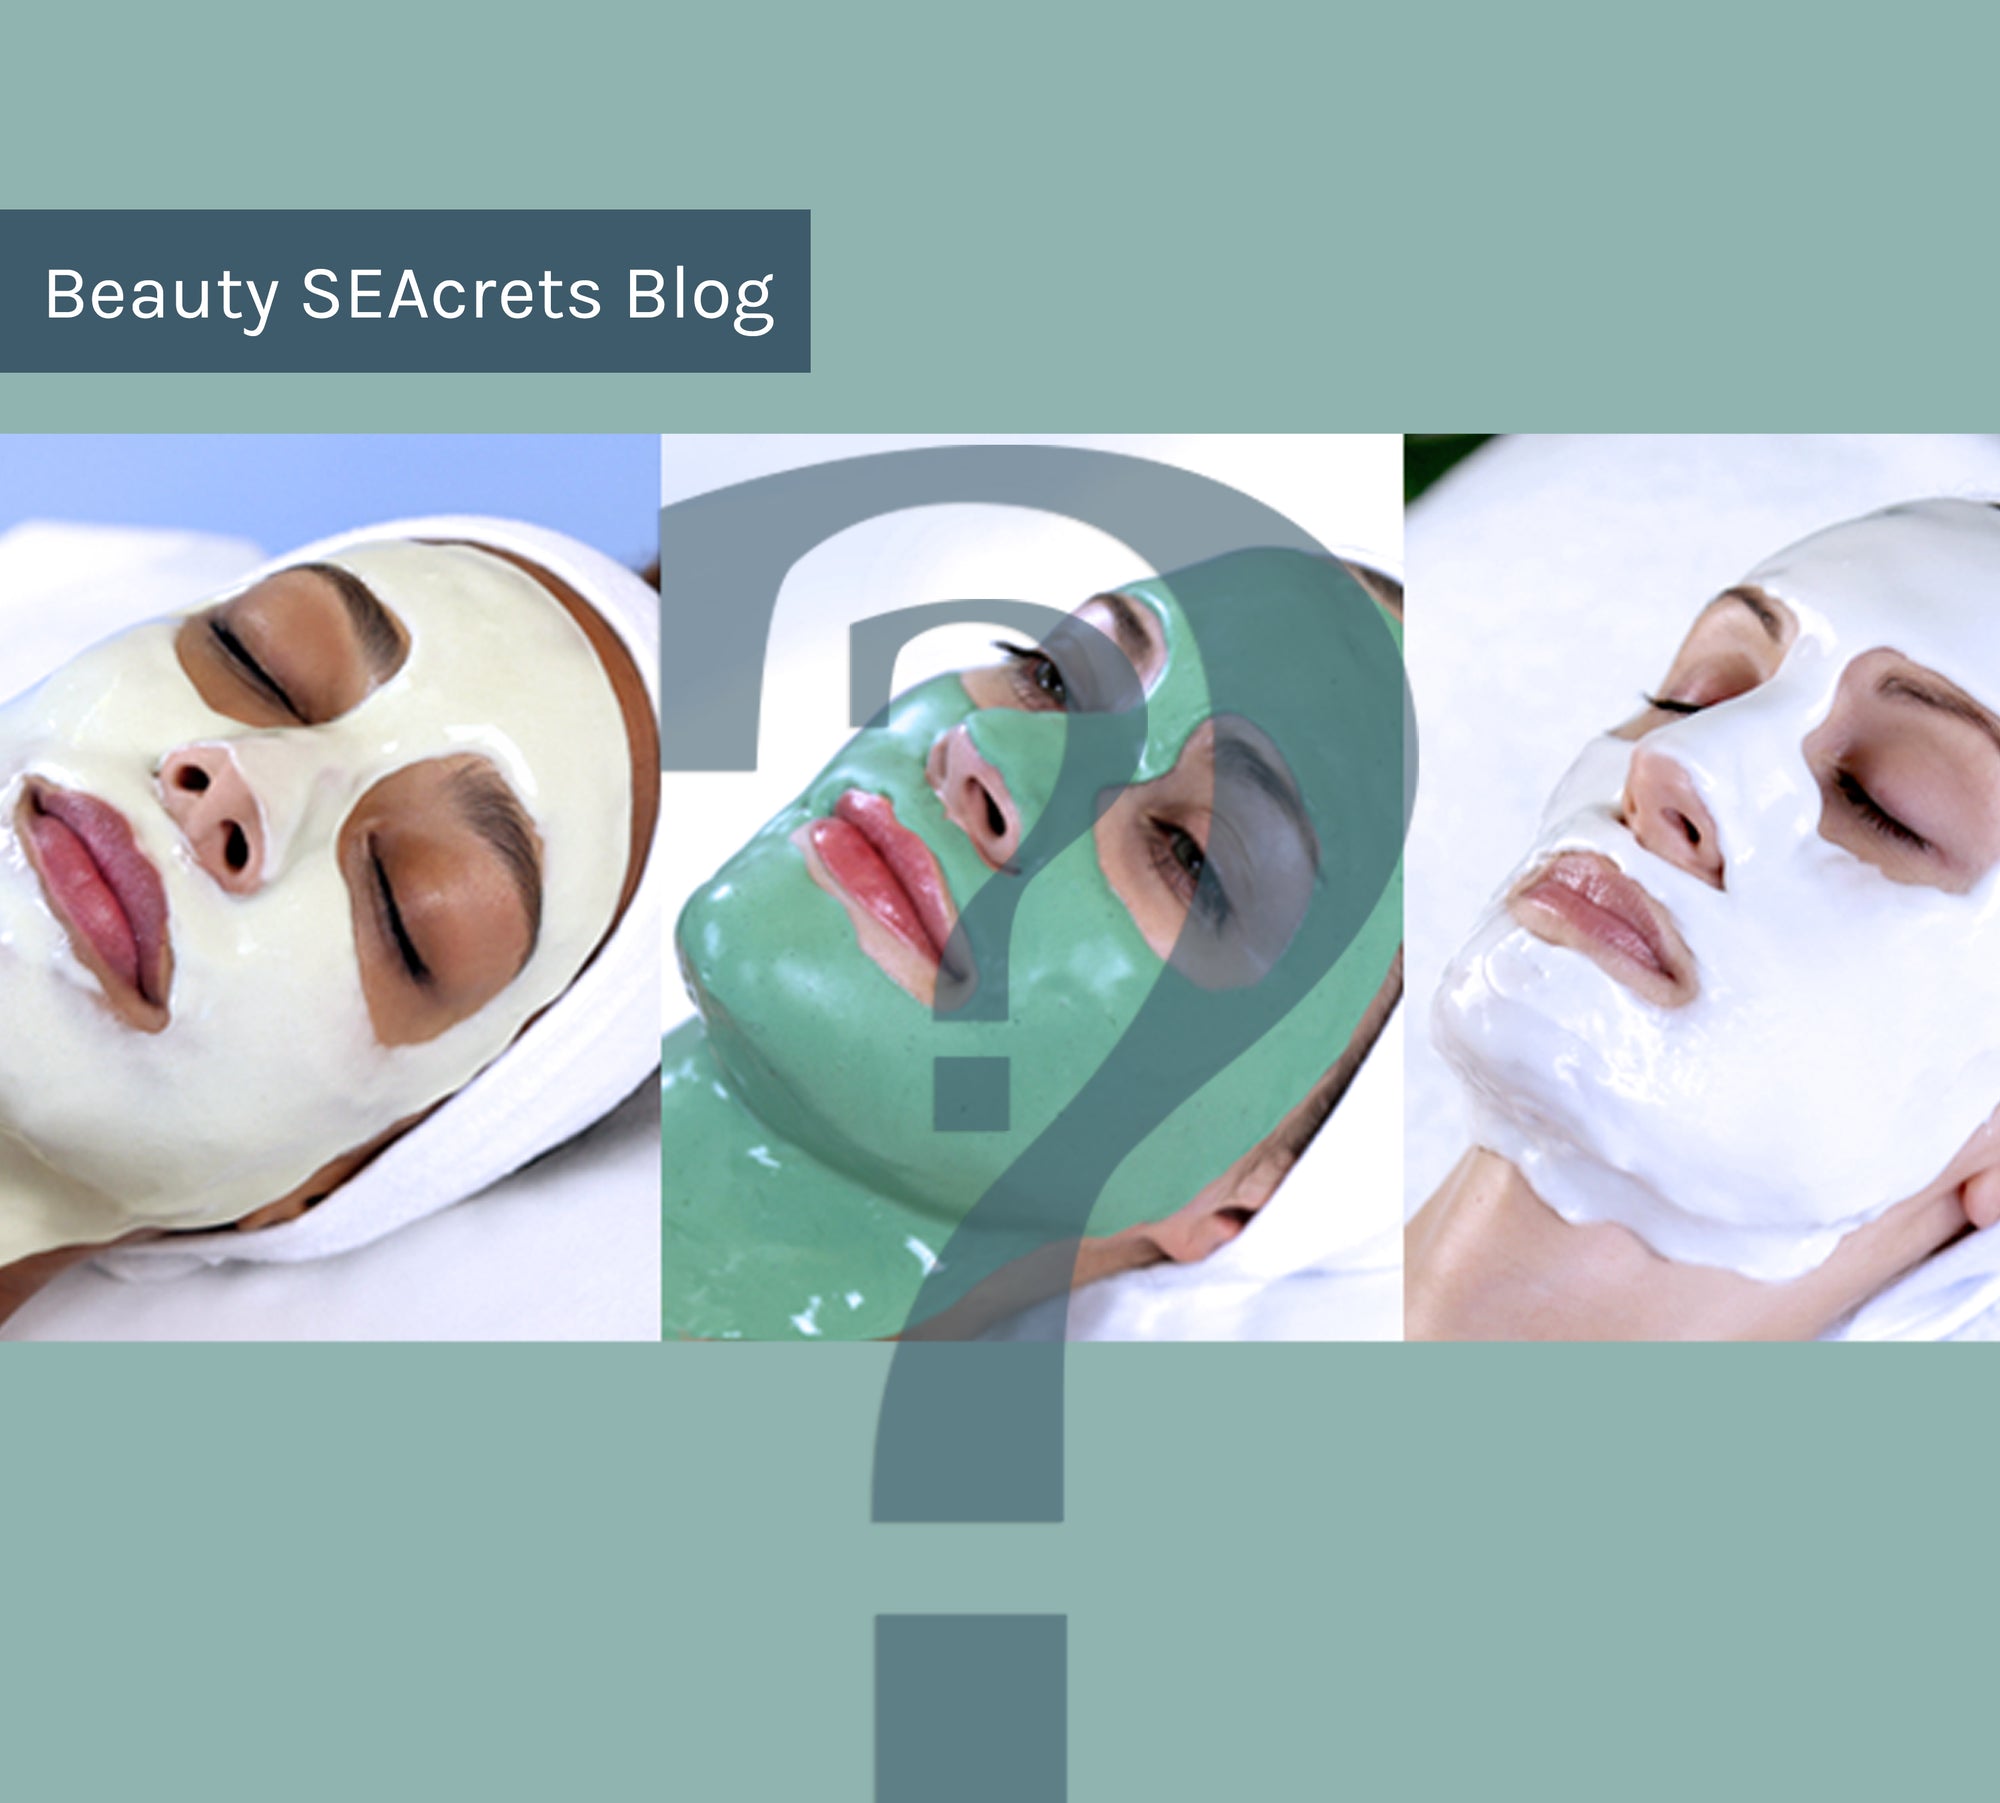 How to Choose the Best Facial Treatment for Your Skin Type